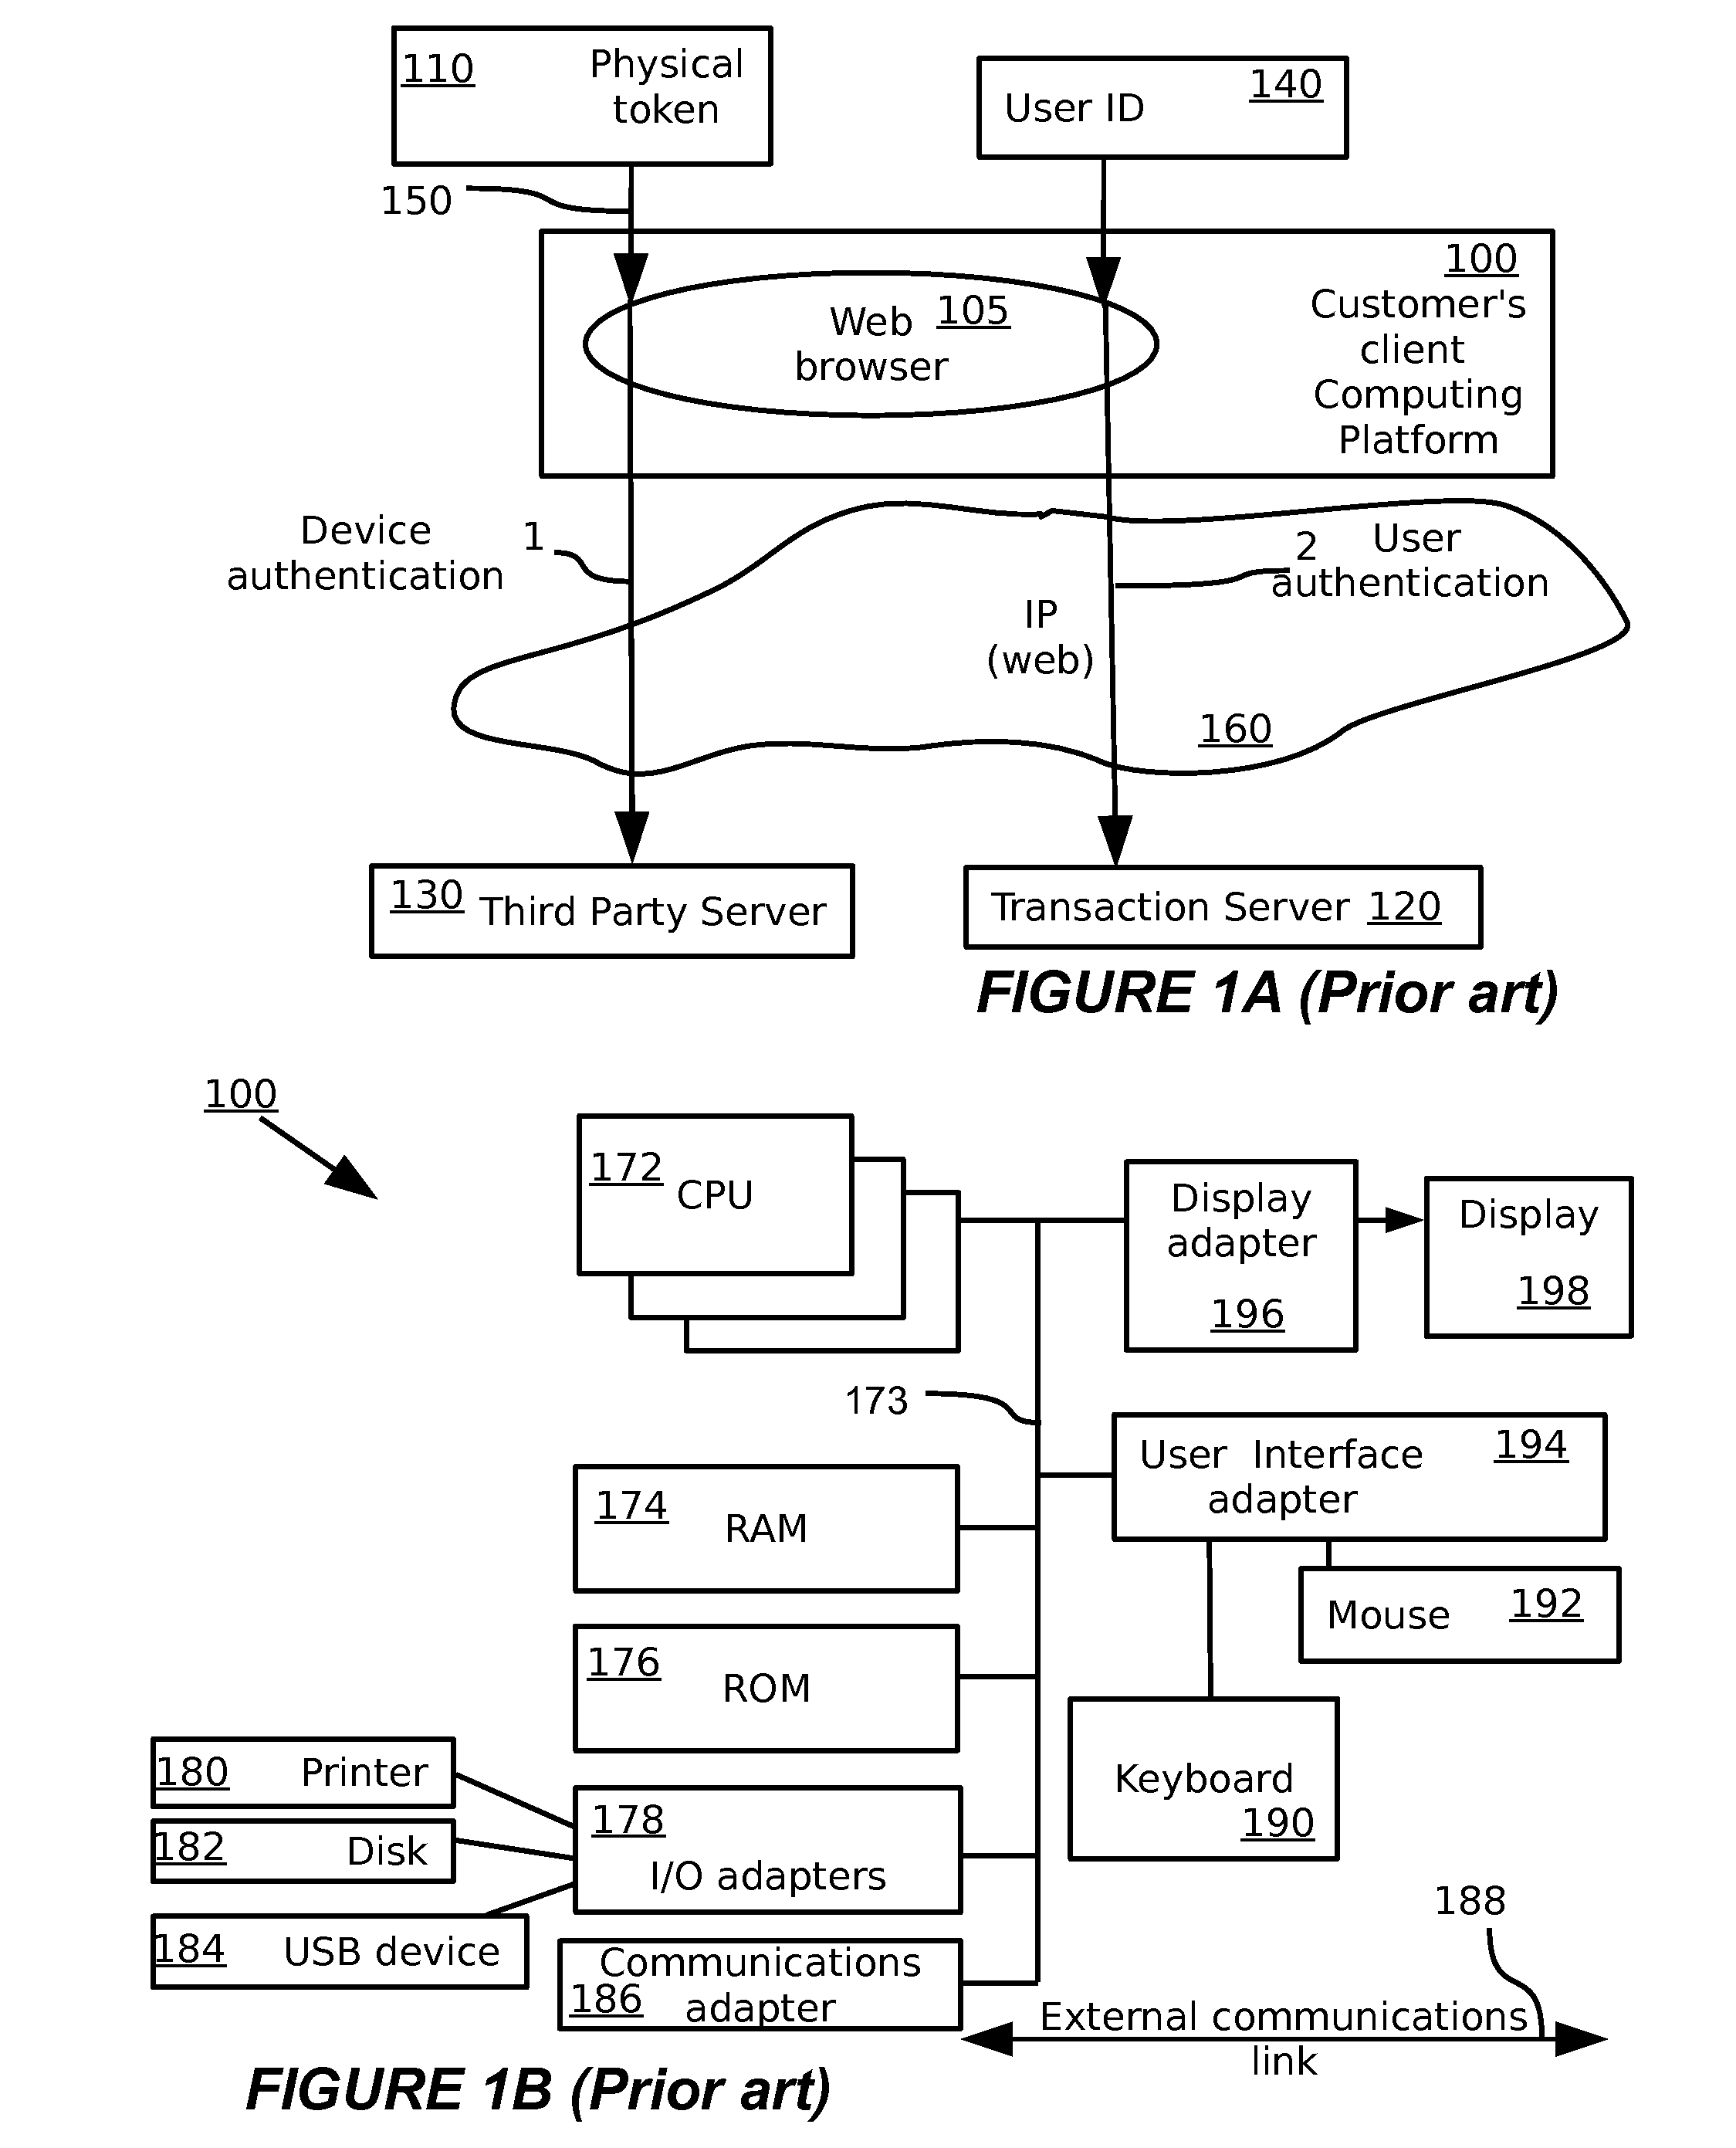 Method and system for authorizing secure electronic transactions using a security device having a quick response code scanner